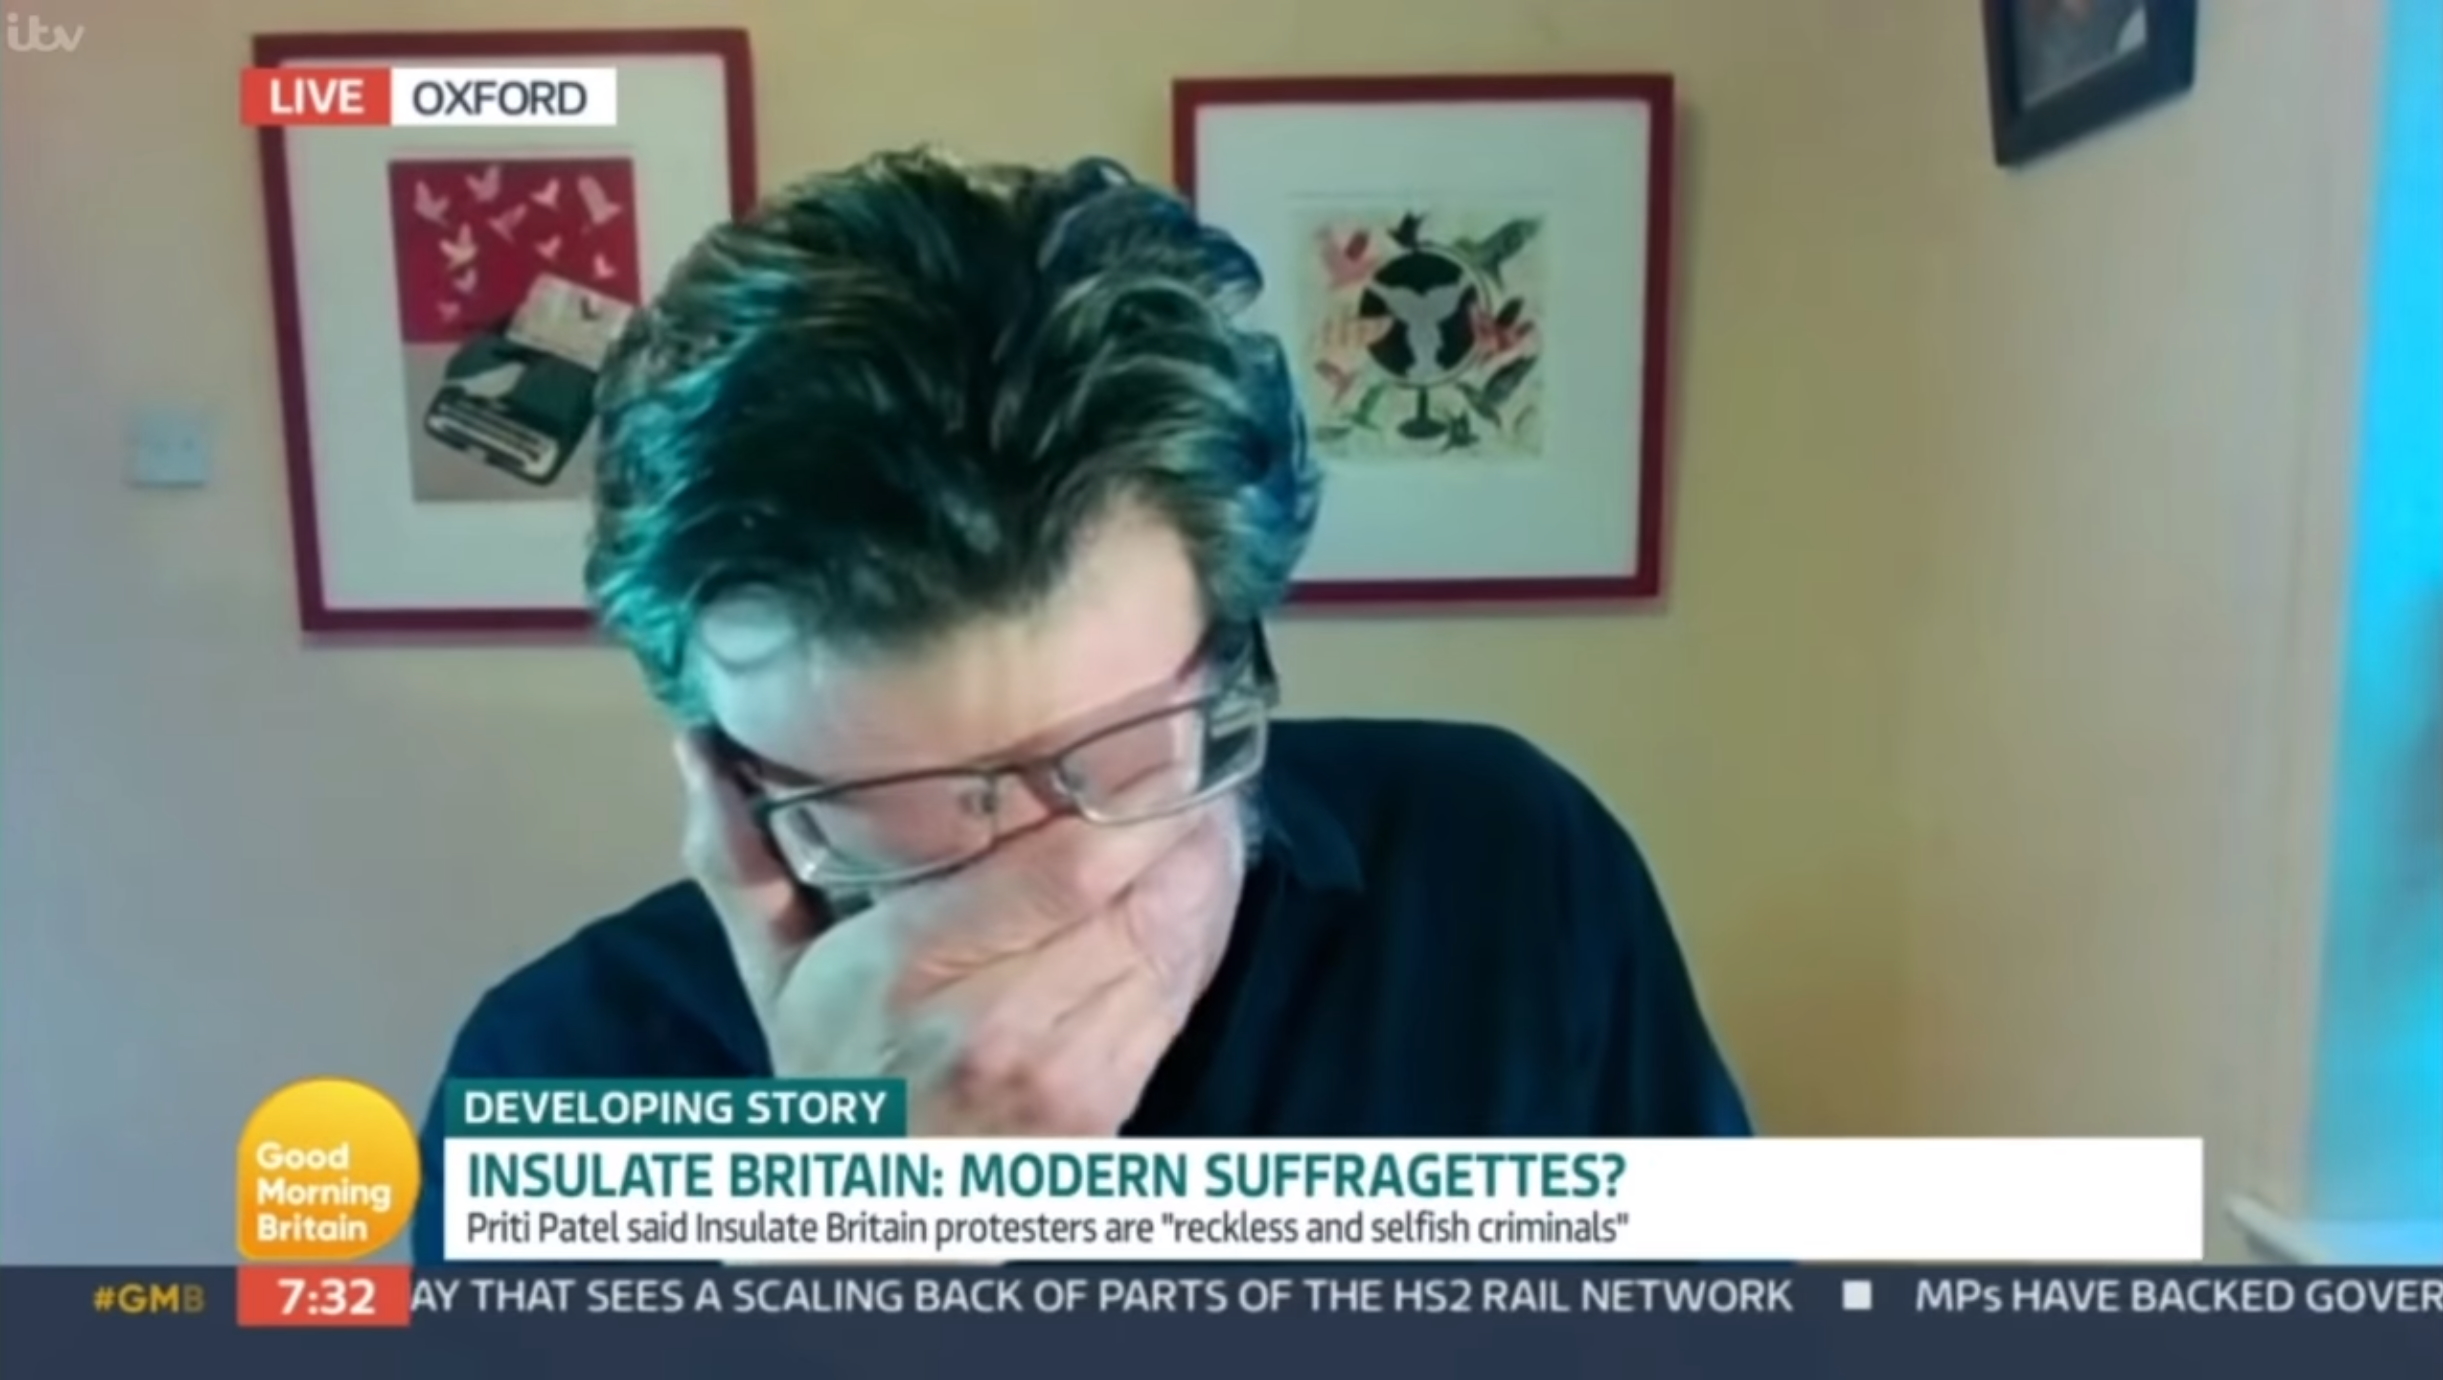 Journalist George Monbiot weeps over the enormity of the climate crisis during an interview on “Good Morning Britain”, 18 November 2021. In a column on 4 January 2022, he wrote, “I tried, for the thousandth time, to explain what we are facing, and suddenly couldn’t hold it in any longer.” Photo: ITV / Insulate Britain / YouTube